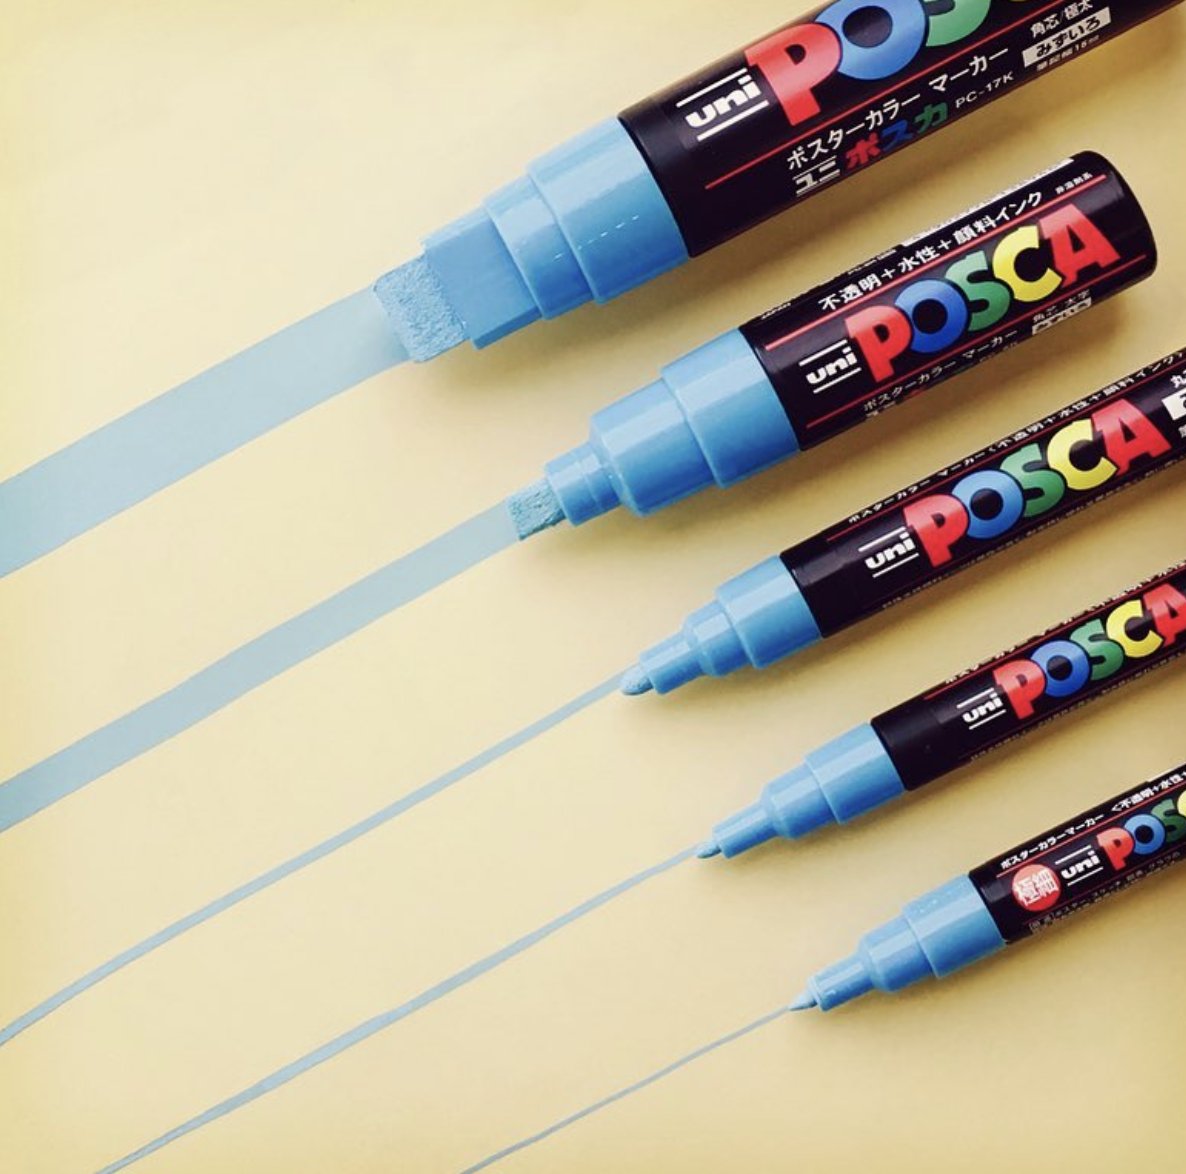 POSCA UK on X: Are you all about those thick strokes or intricate lines?  If you could design your own POSCA nib would you make them thicker or  thinner? Photo by @POSCAperu